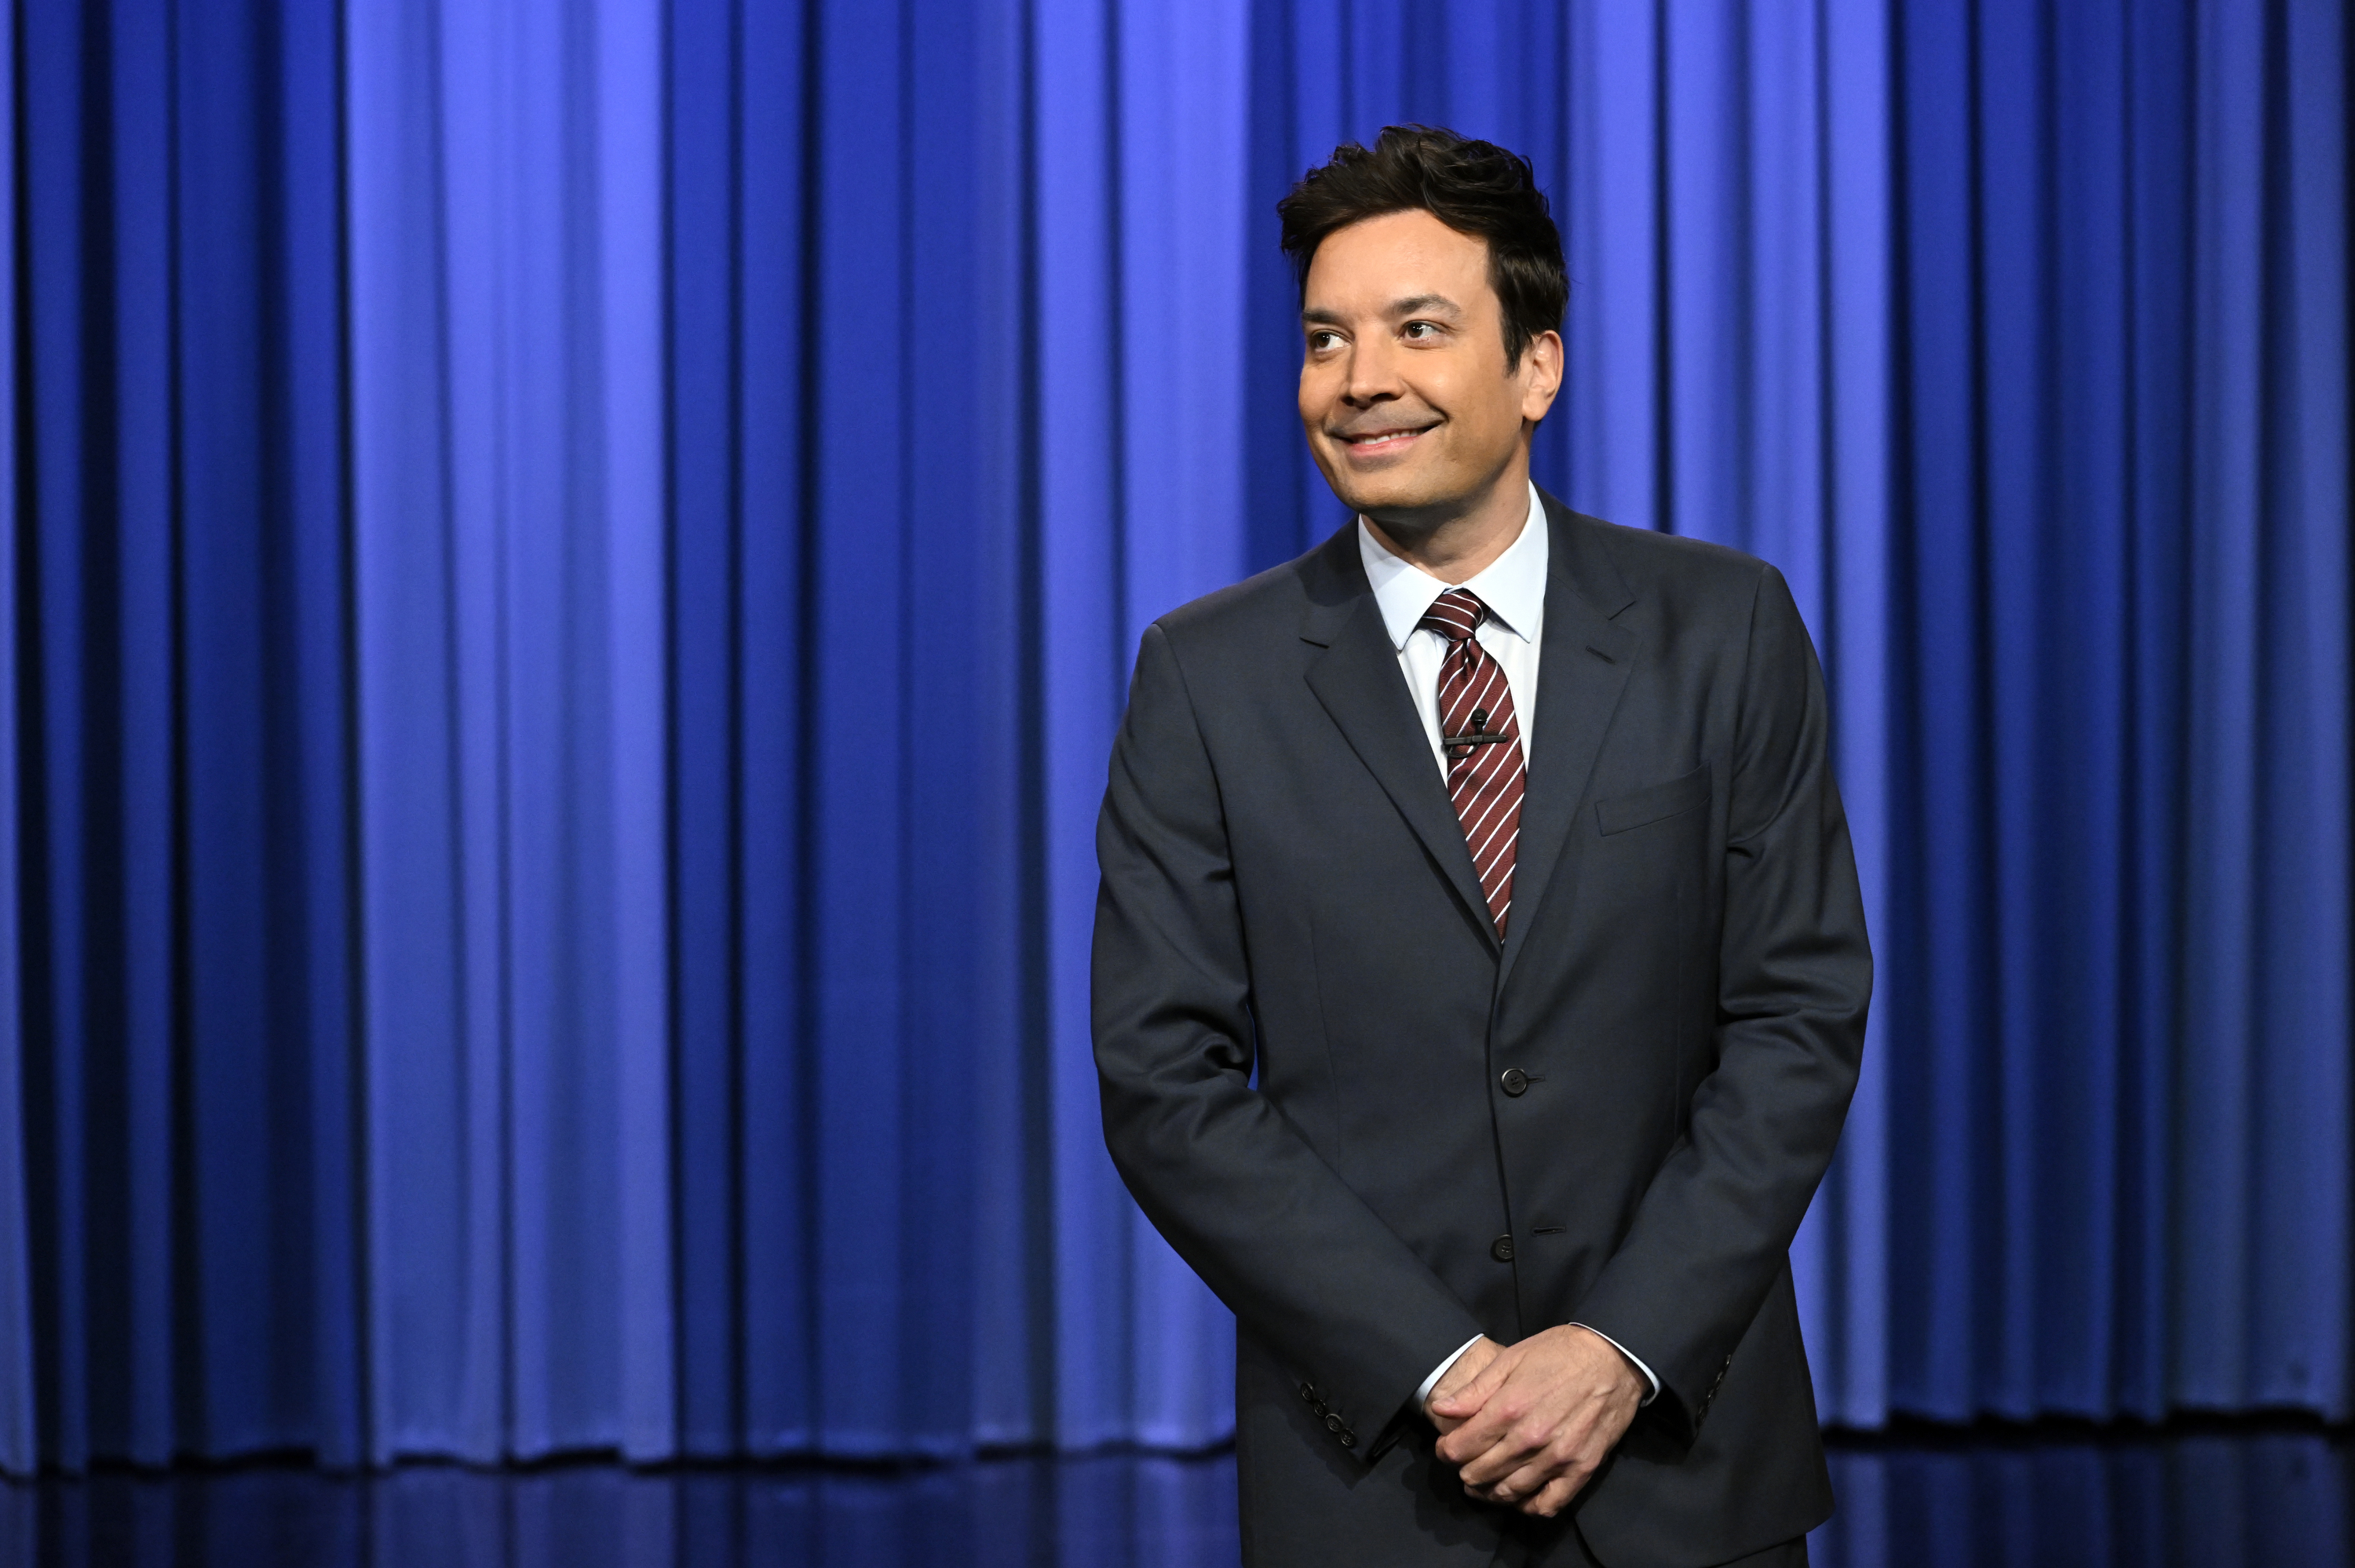 Jimmy smiling during his monologue